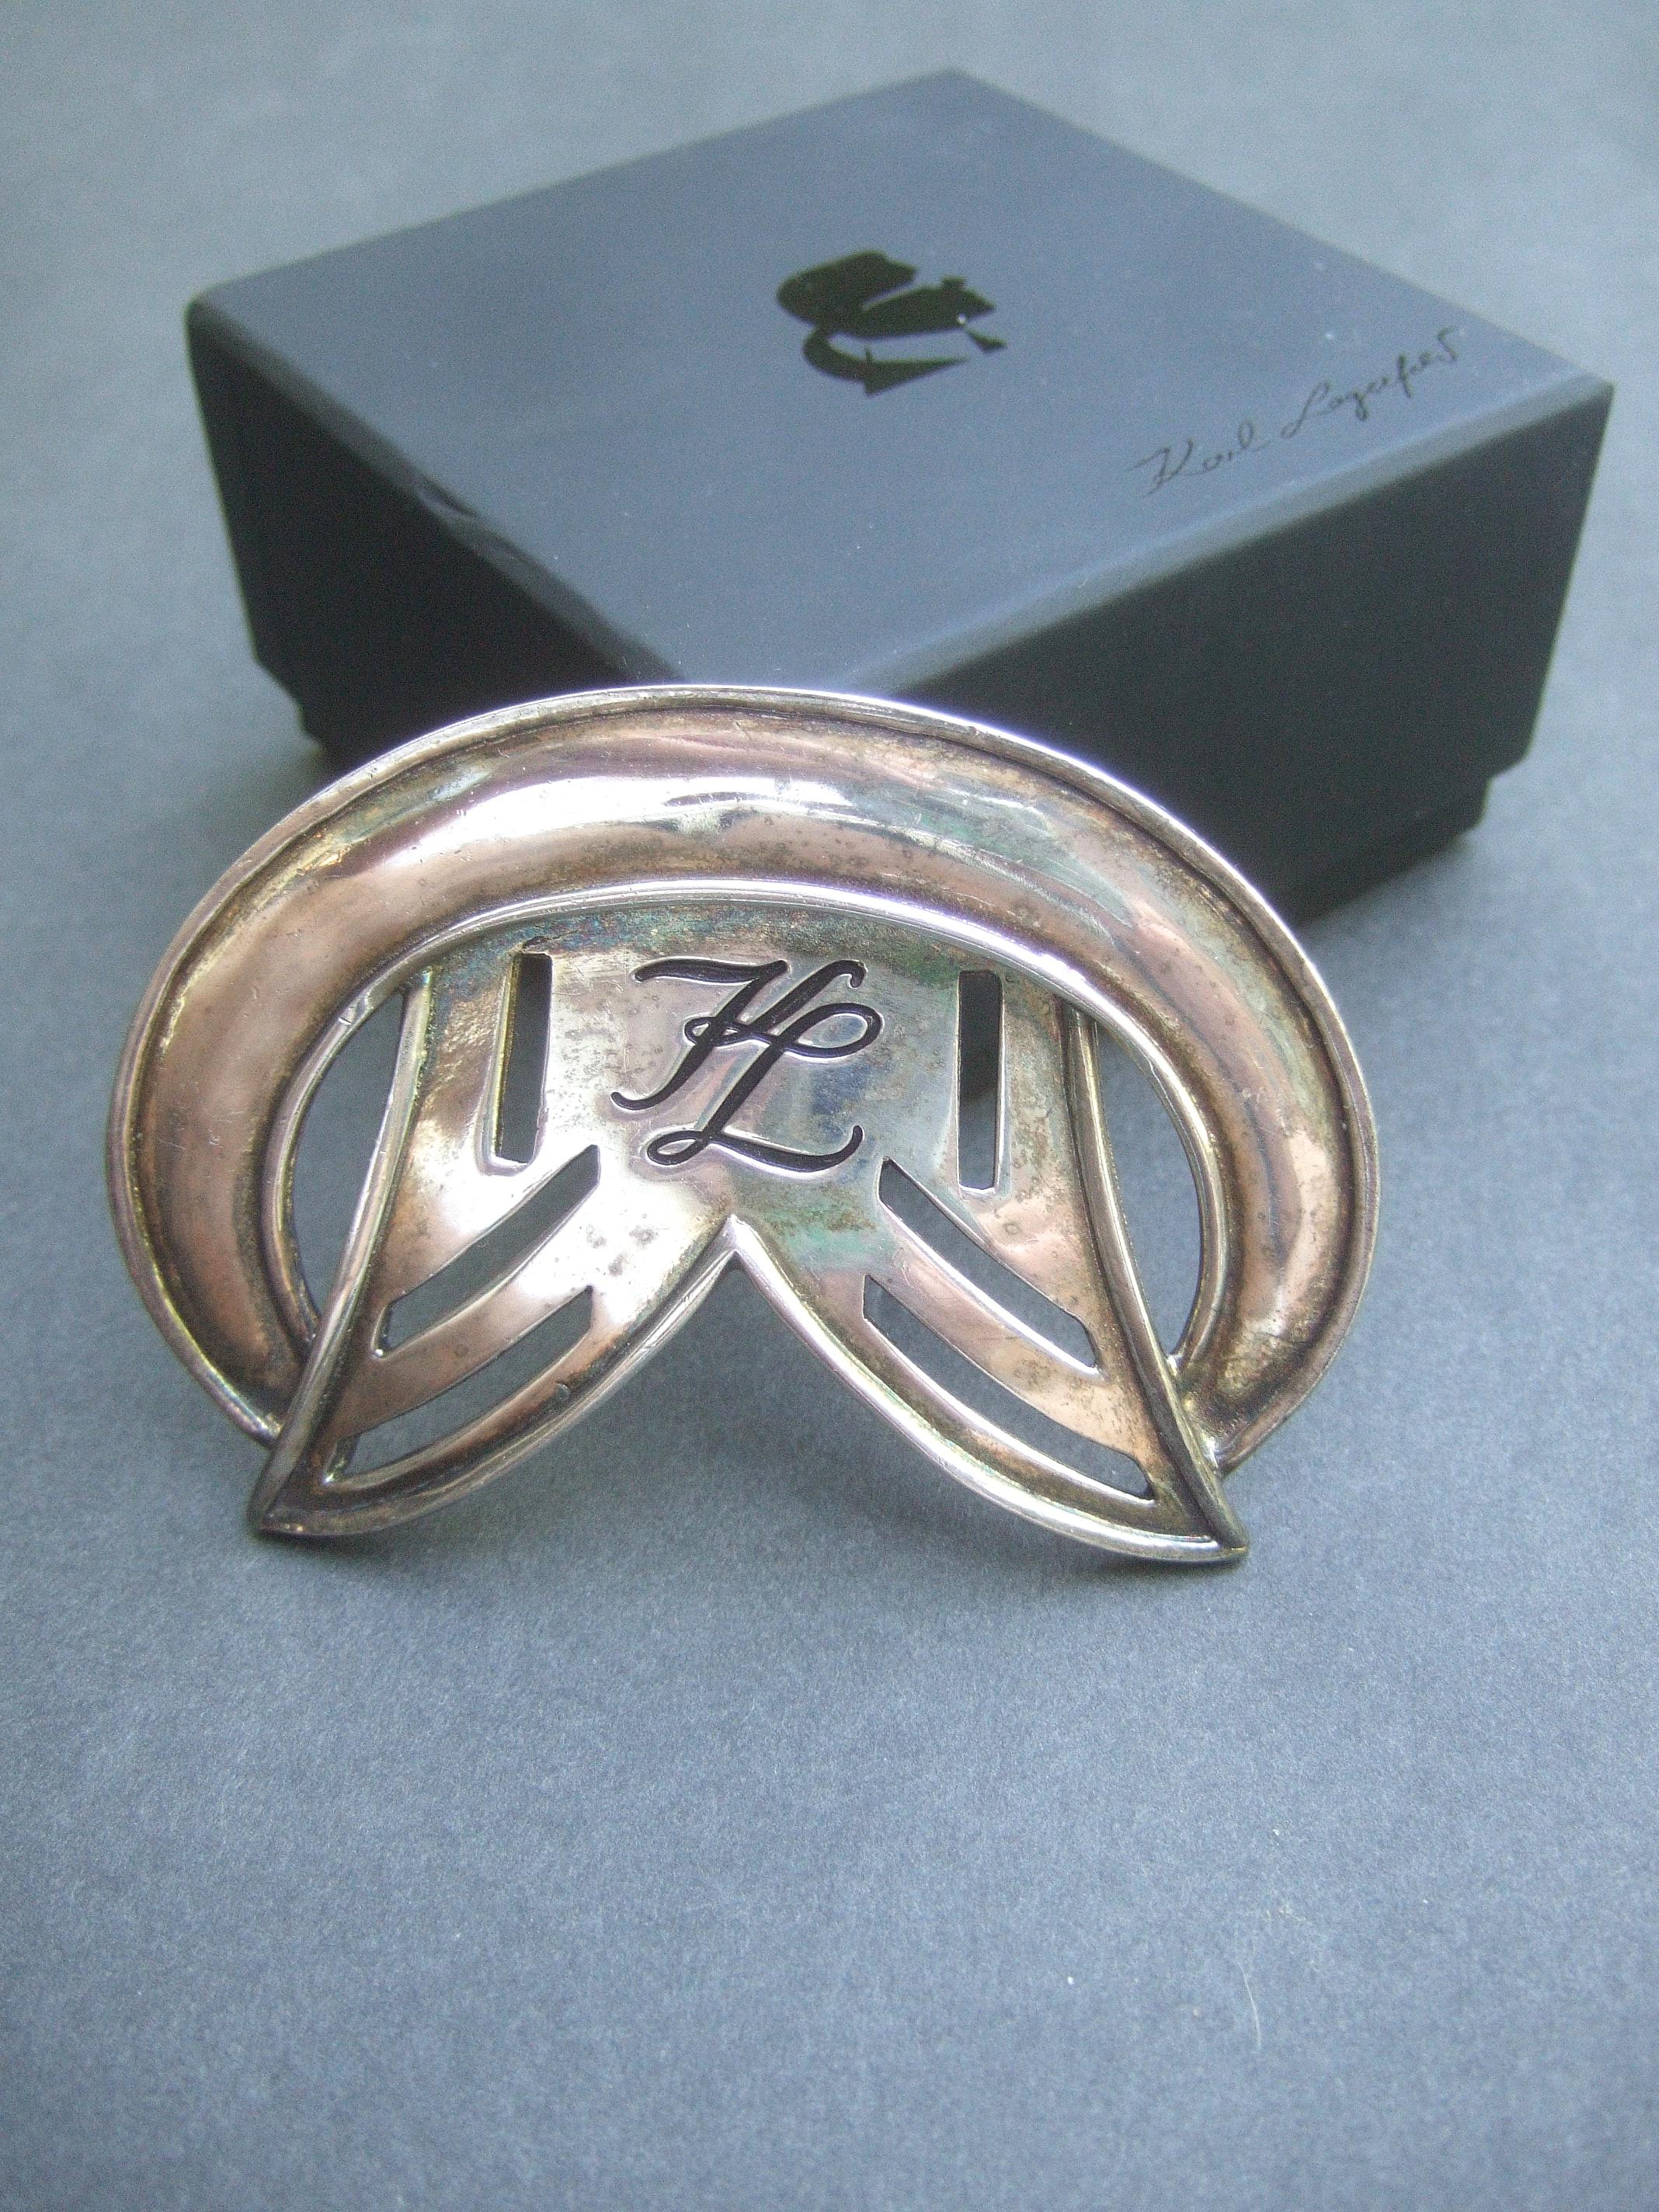 Karl Lagerfeld Sleek large silver metal designer brooch in K.L. presentation box c 1980s
The large scale silver metal brooch is designed with Karl Lagerfeld's
iconic script initials with black enamel 

The curved upper section and sides are